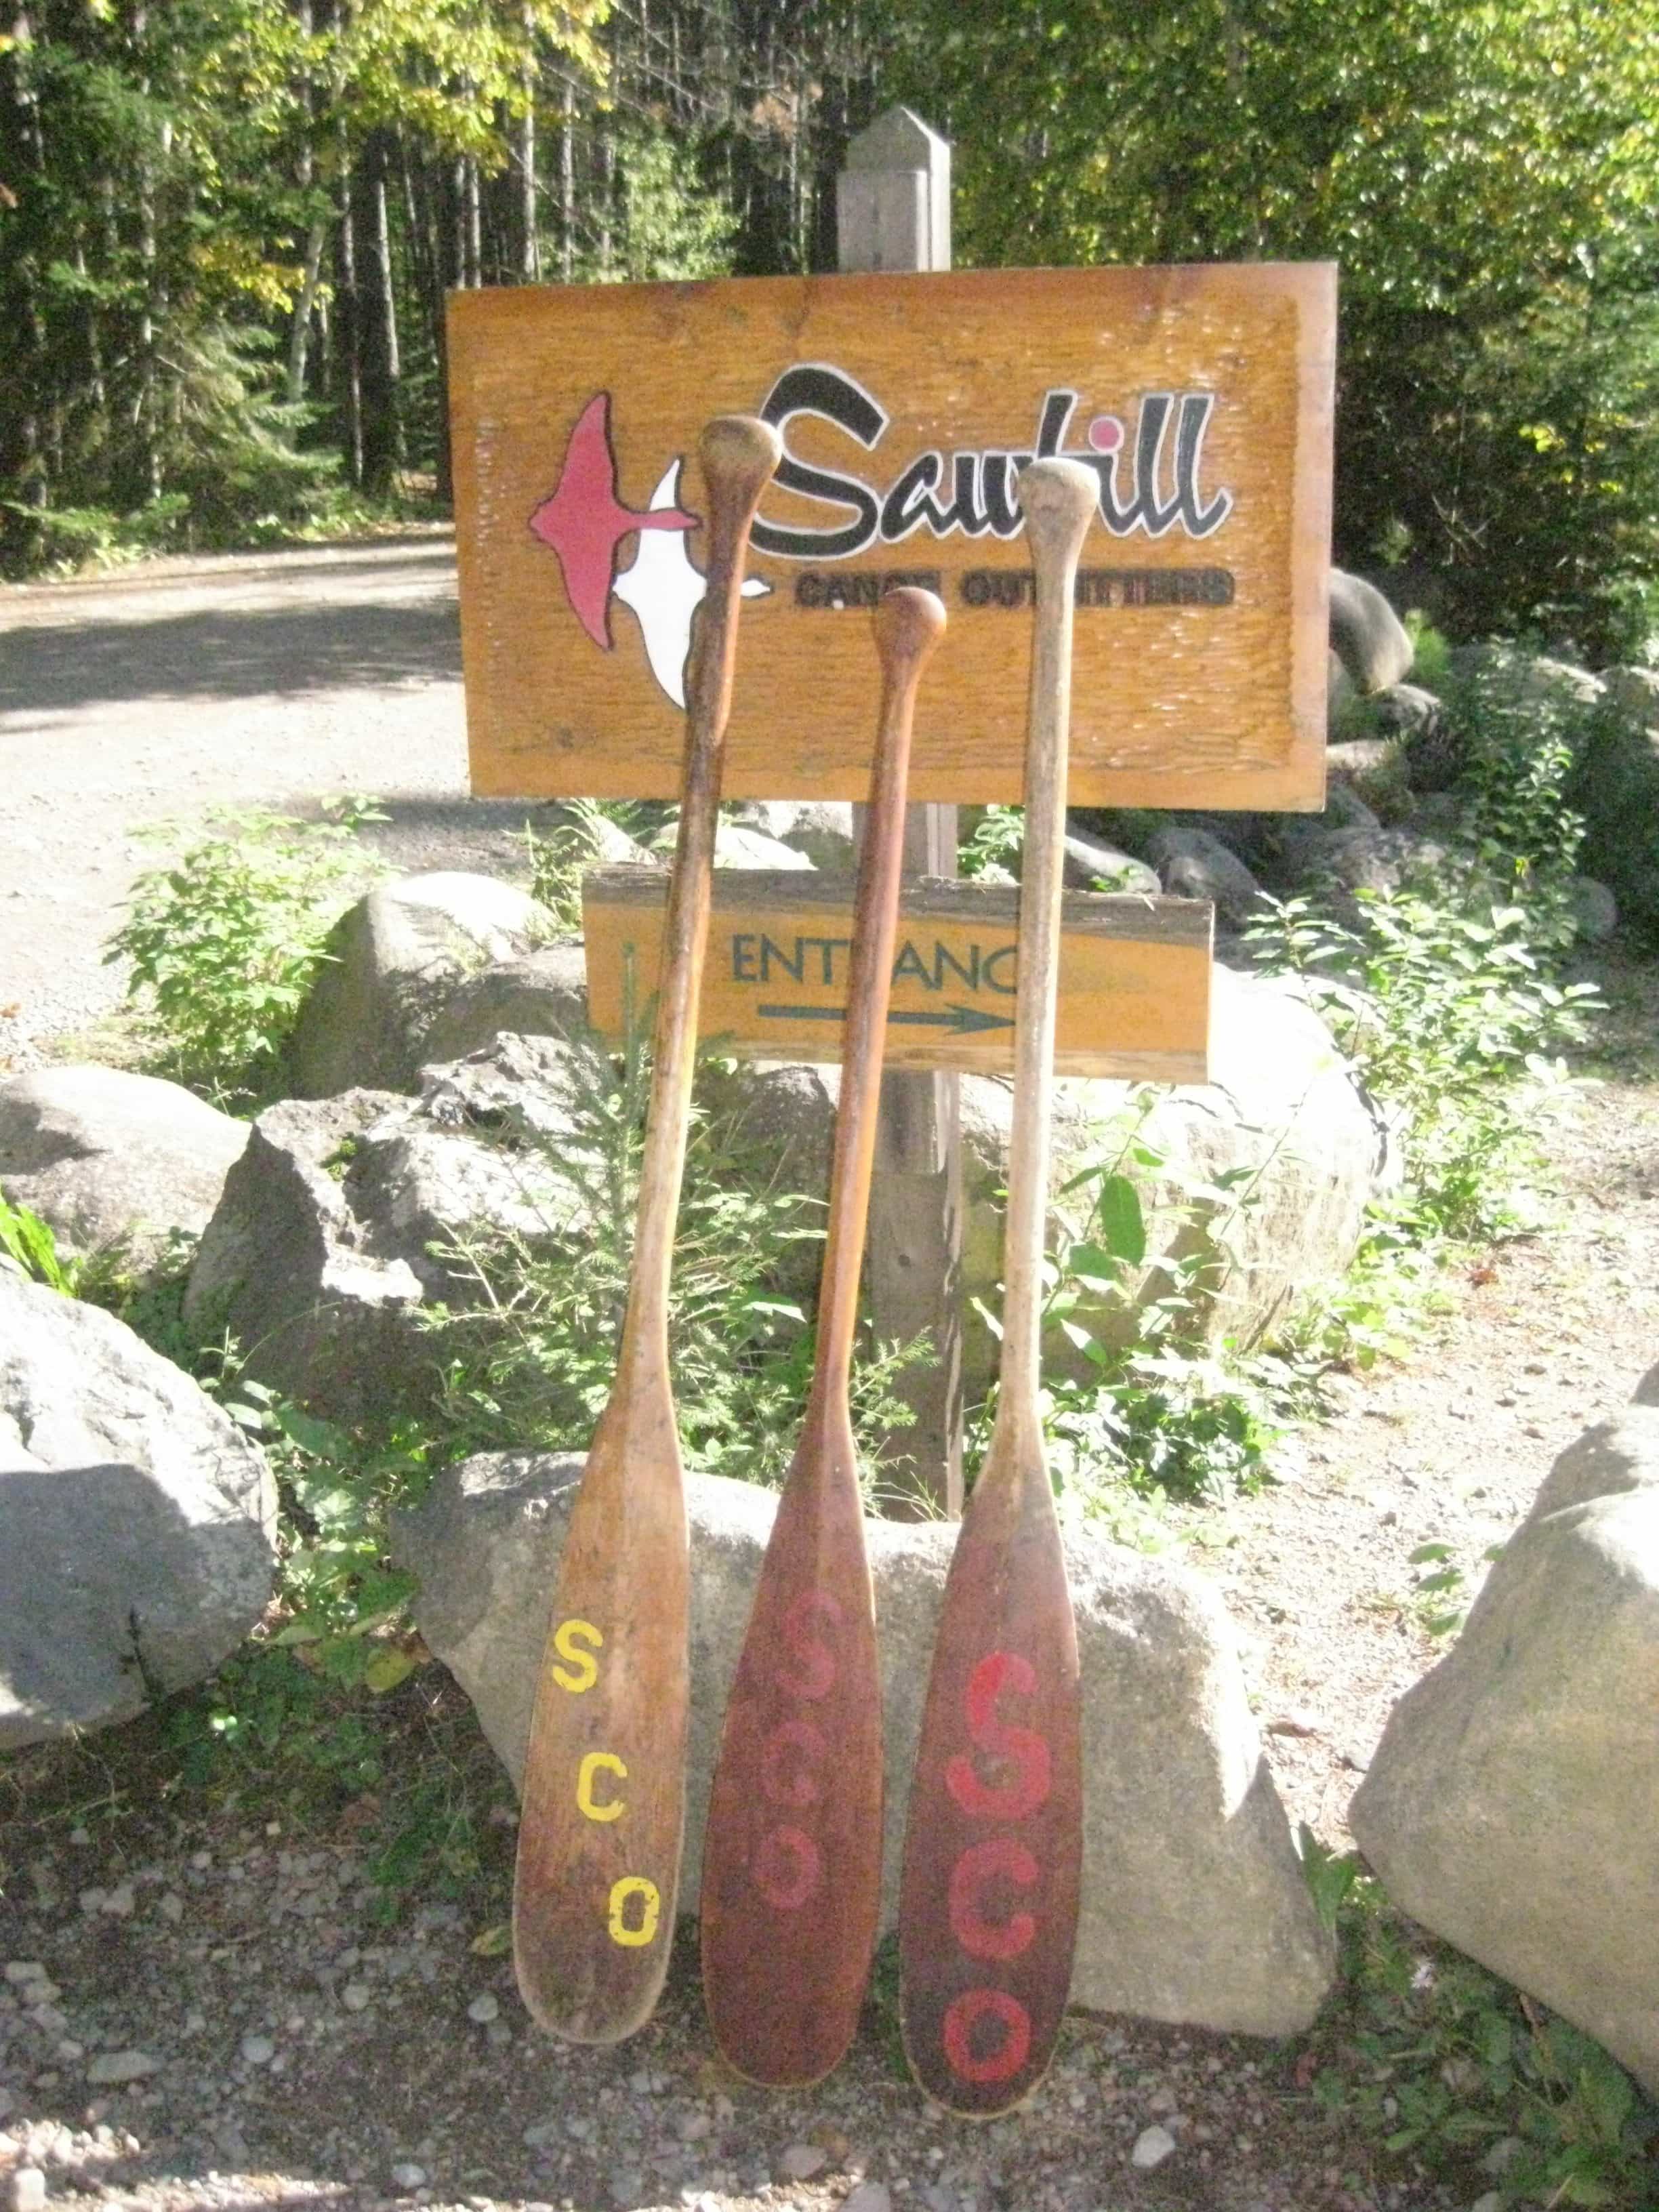 Sawbill Canoe Outfitters has been introducing people to canoeing and the Boundary Waters Canoe Area Wilderness since 1957. Photo courtesy Bill Hansen.